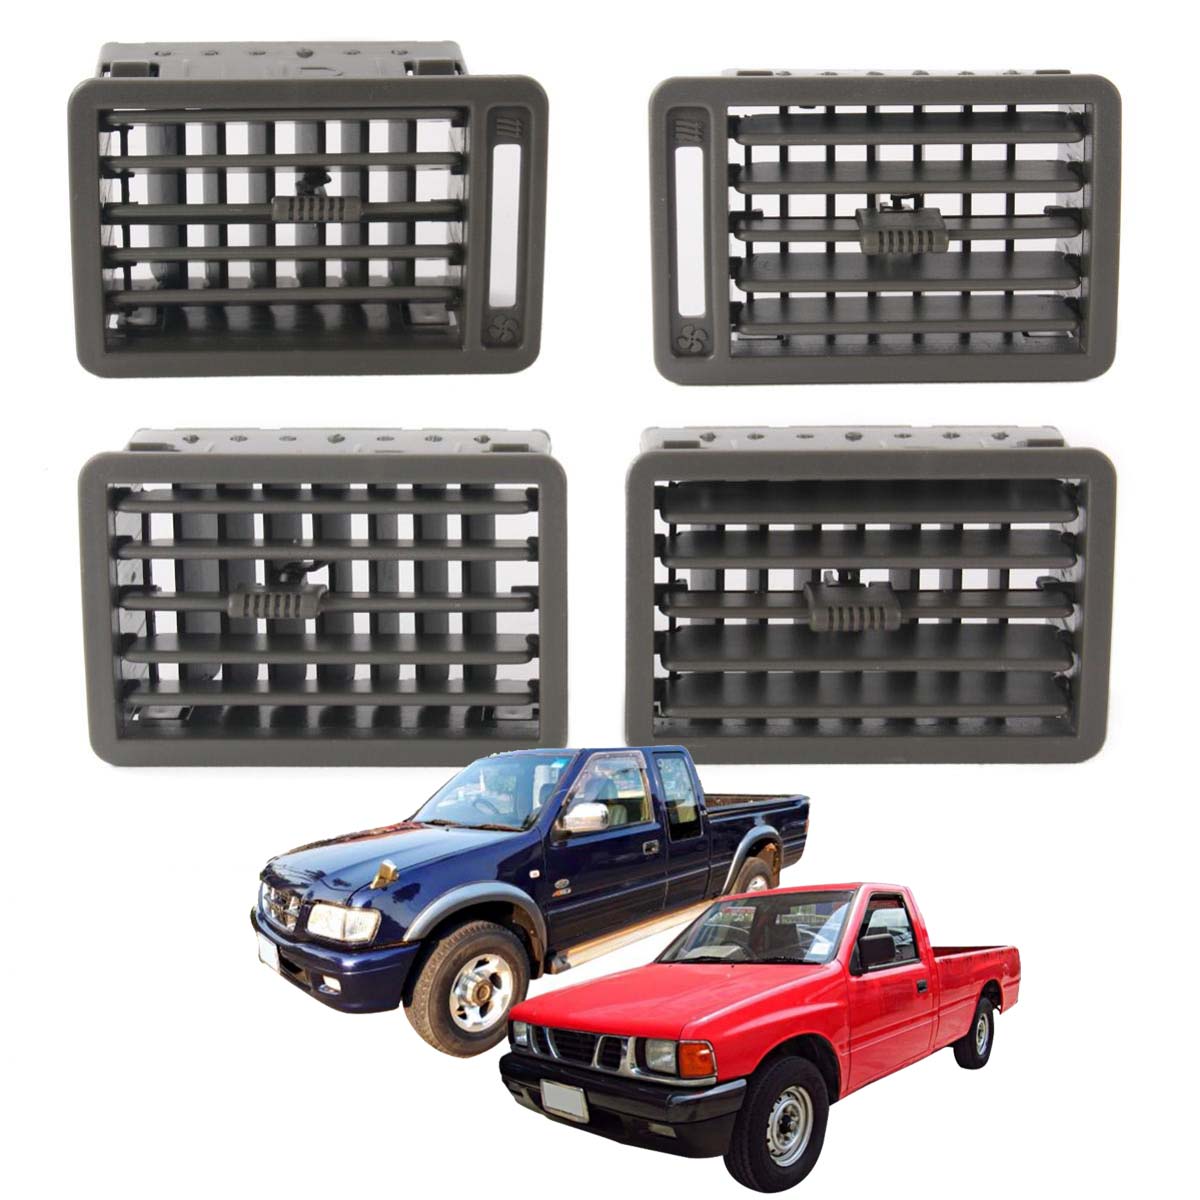 Set Grille Air Condition Ventilator  Black For Toyota Hilux Mighty-X 1988 1997